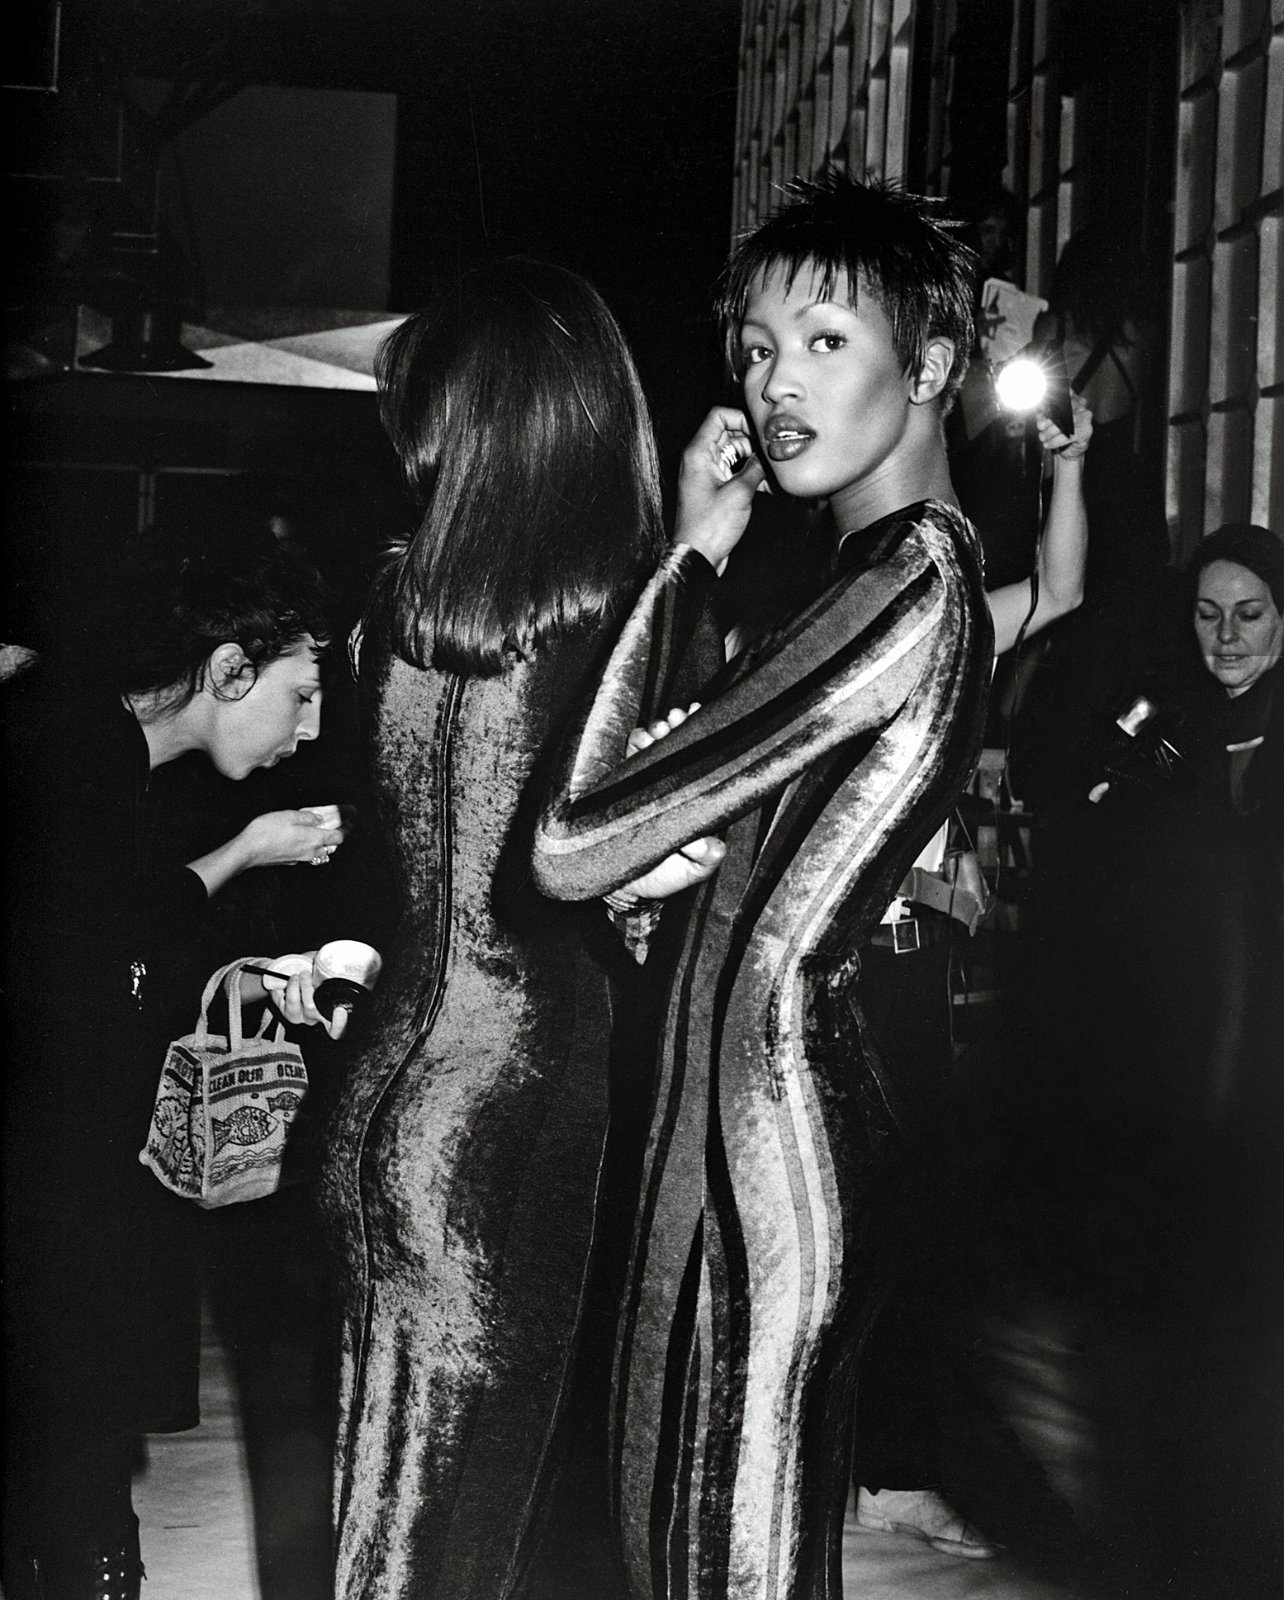 Naomi Campbell at Versace Milan, 1990’s wearing a velvet gown